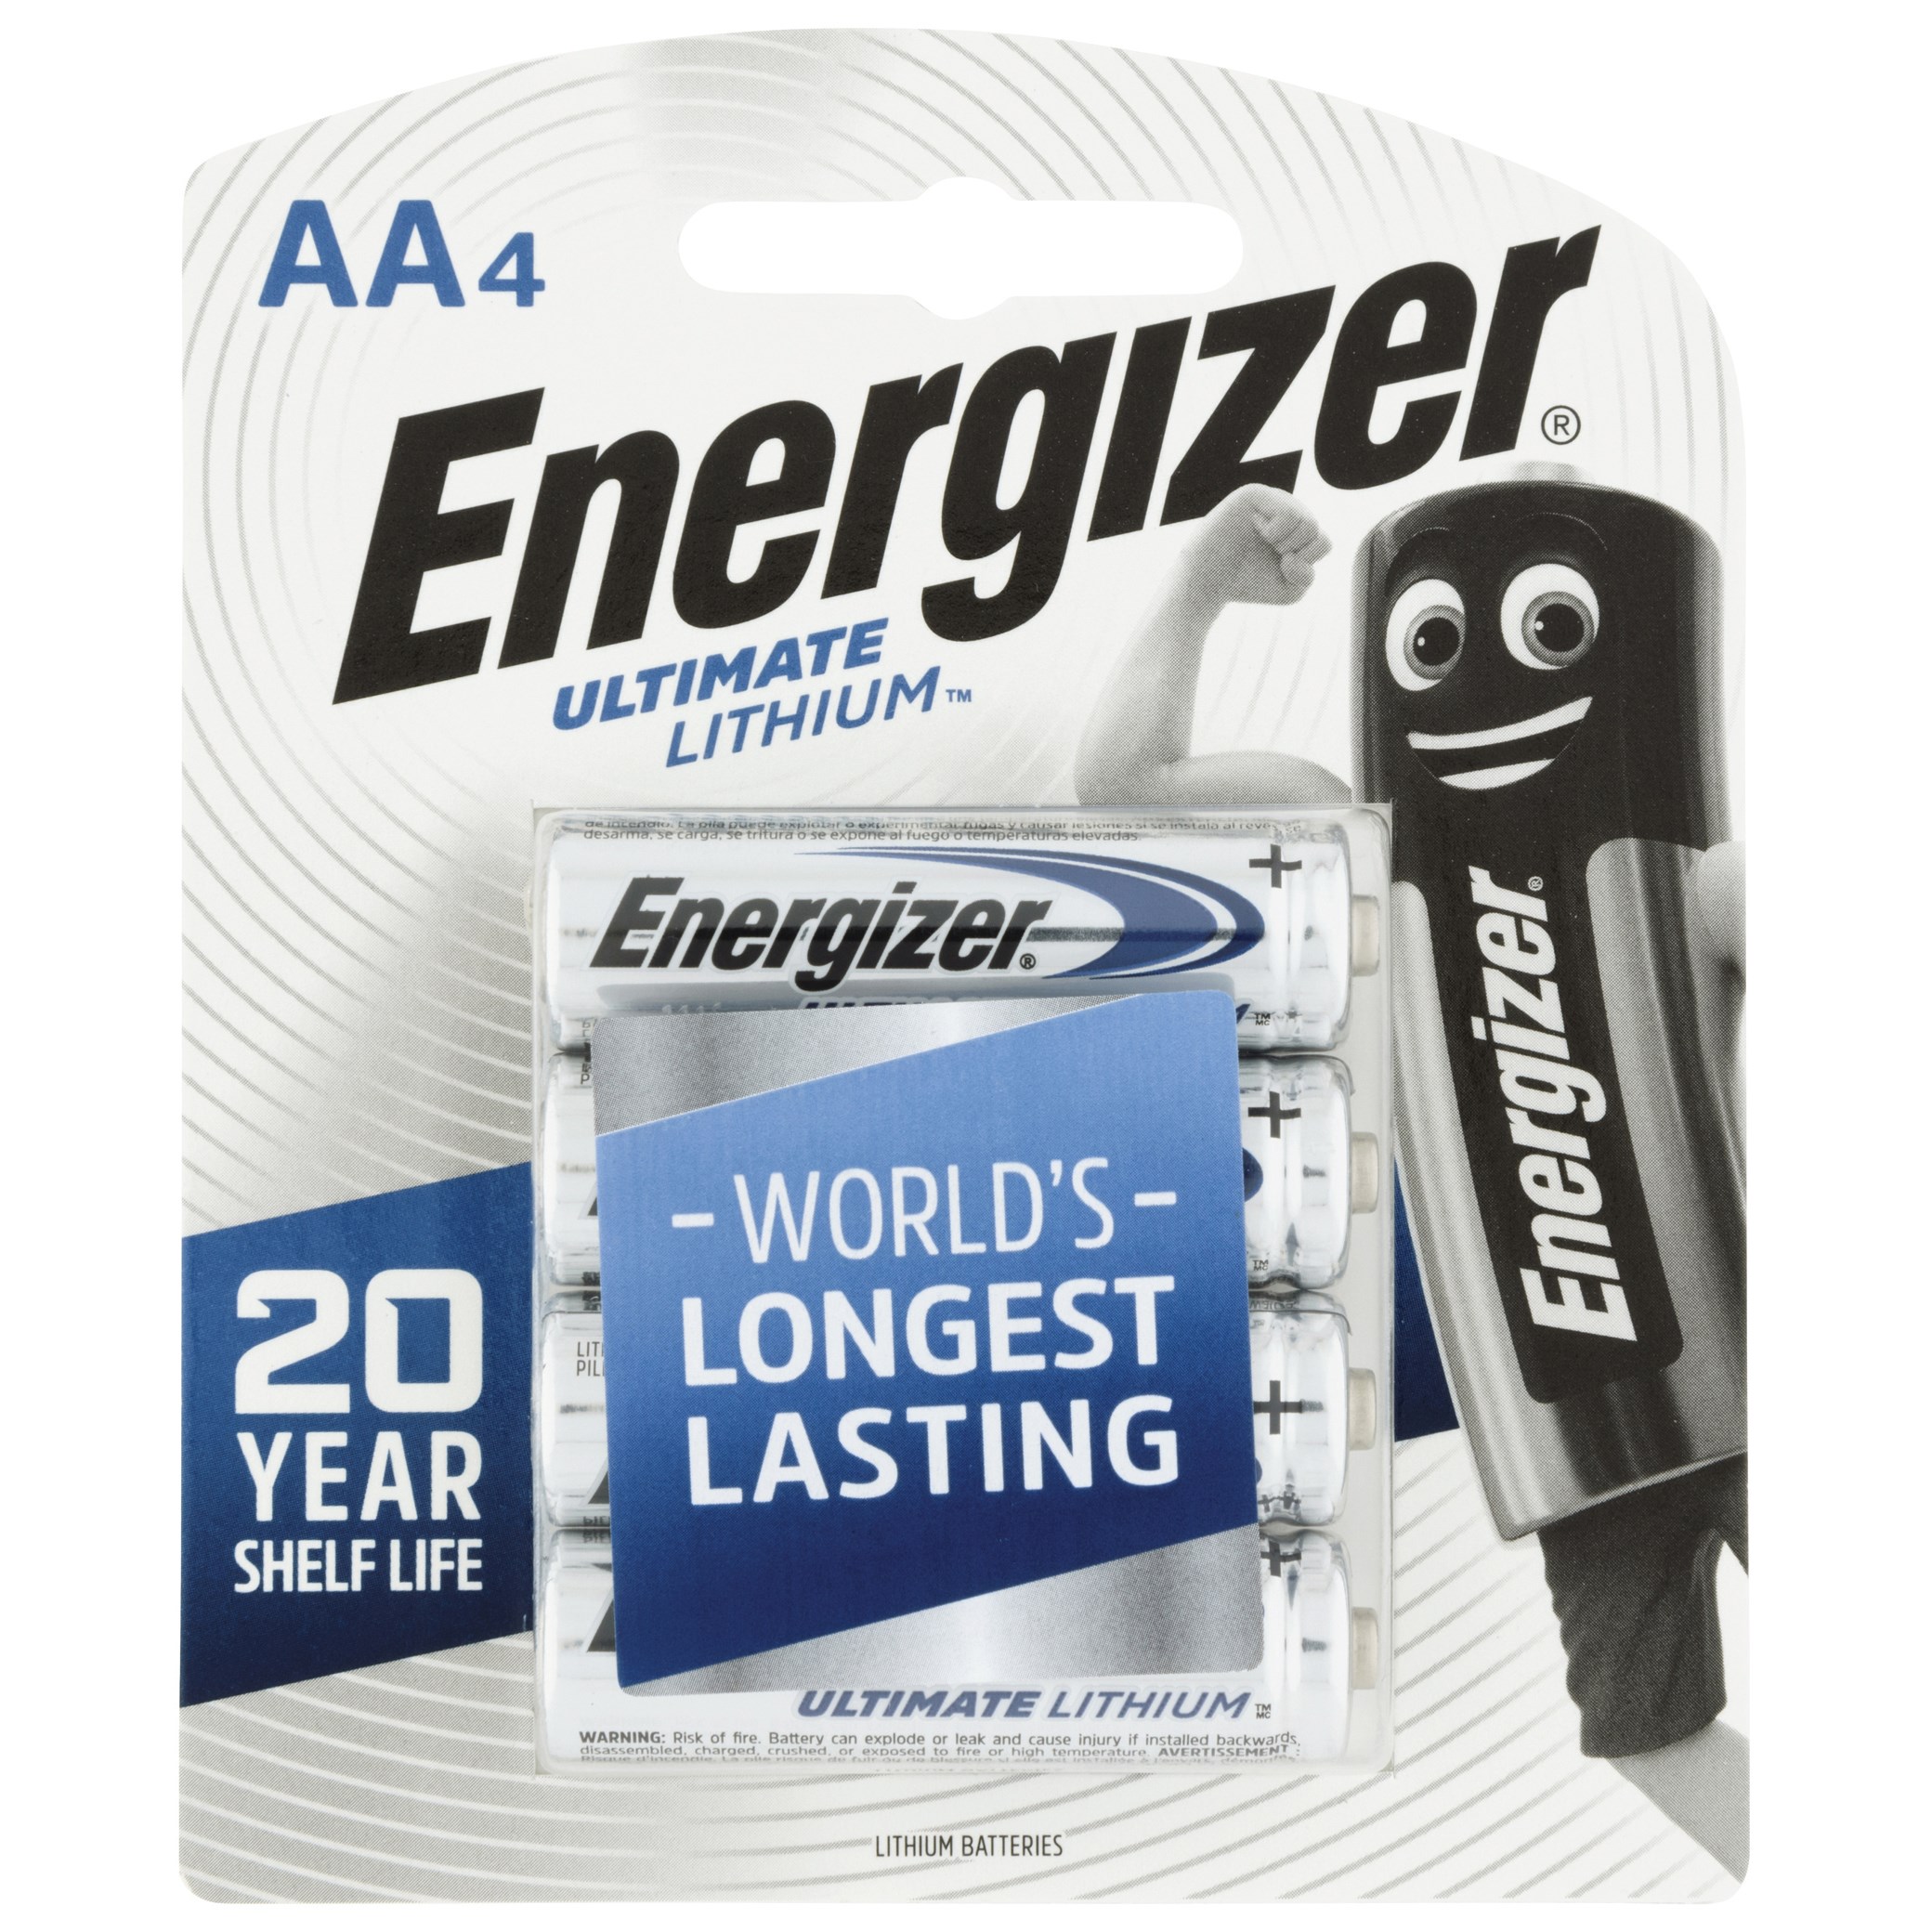 Energizer Ultimate Lithium AA Batteries (2-Pack) – Temp Stick